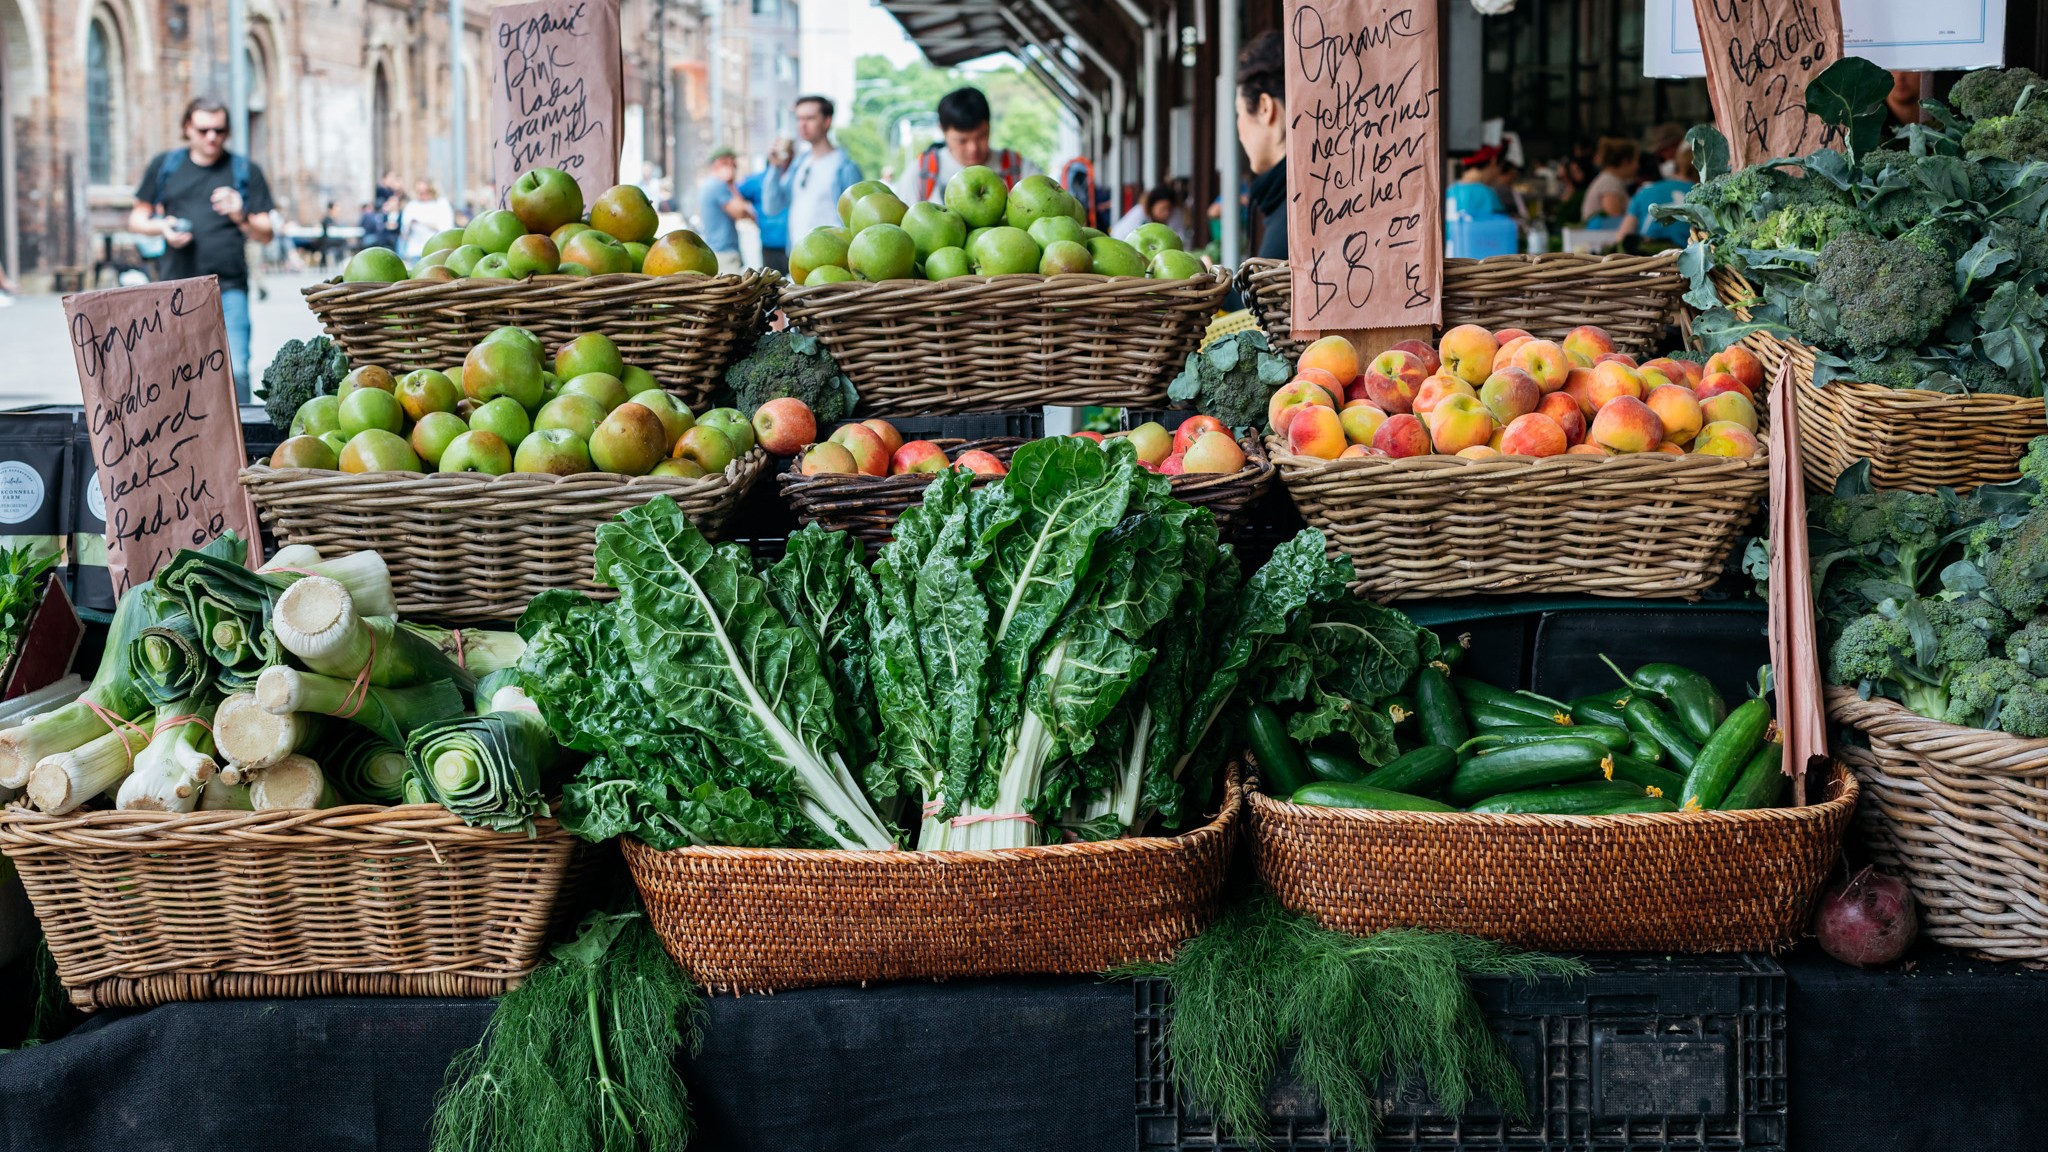 Carriageworks Farmers Market: Online Ordering Directory - Carriageworks